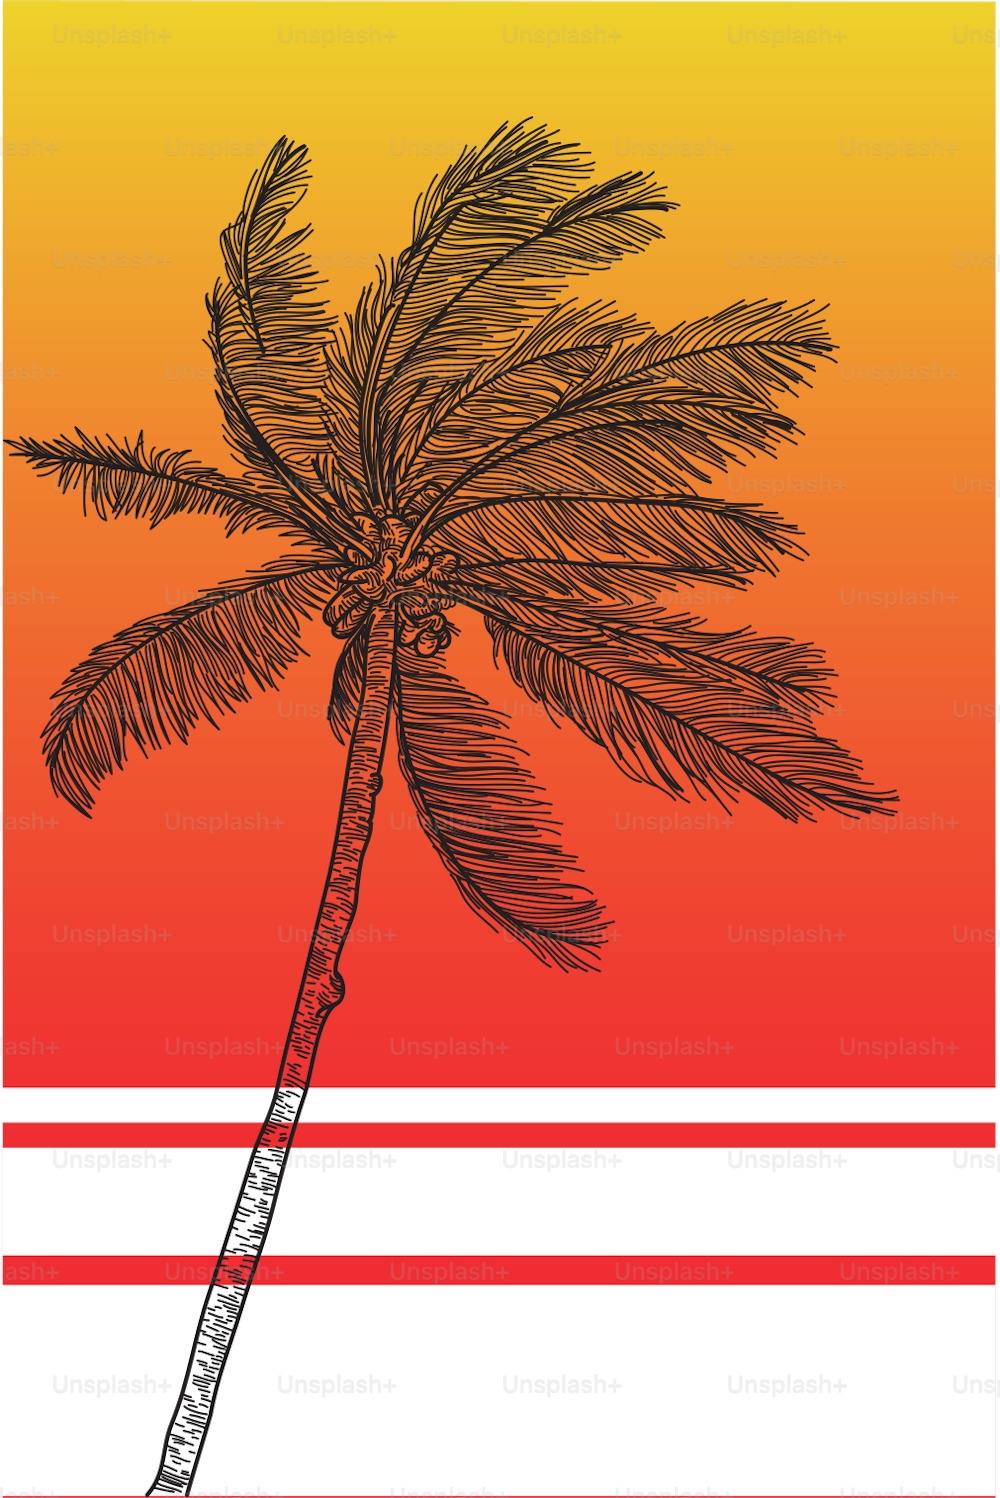 A retro palm tree for use in your designs.